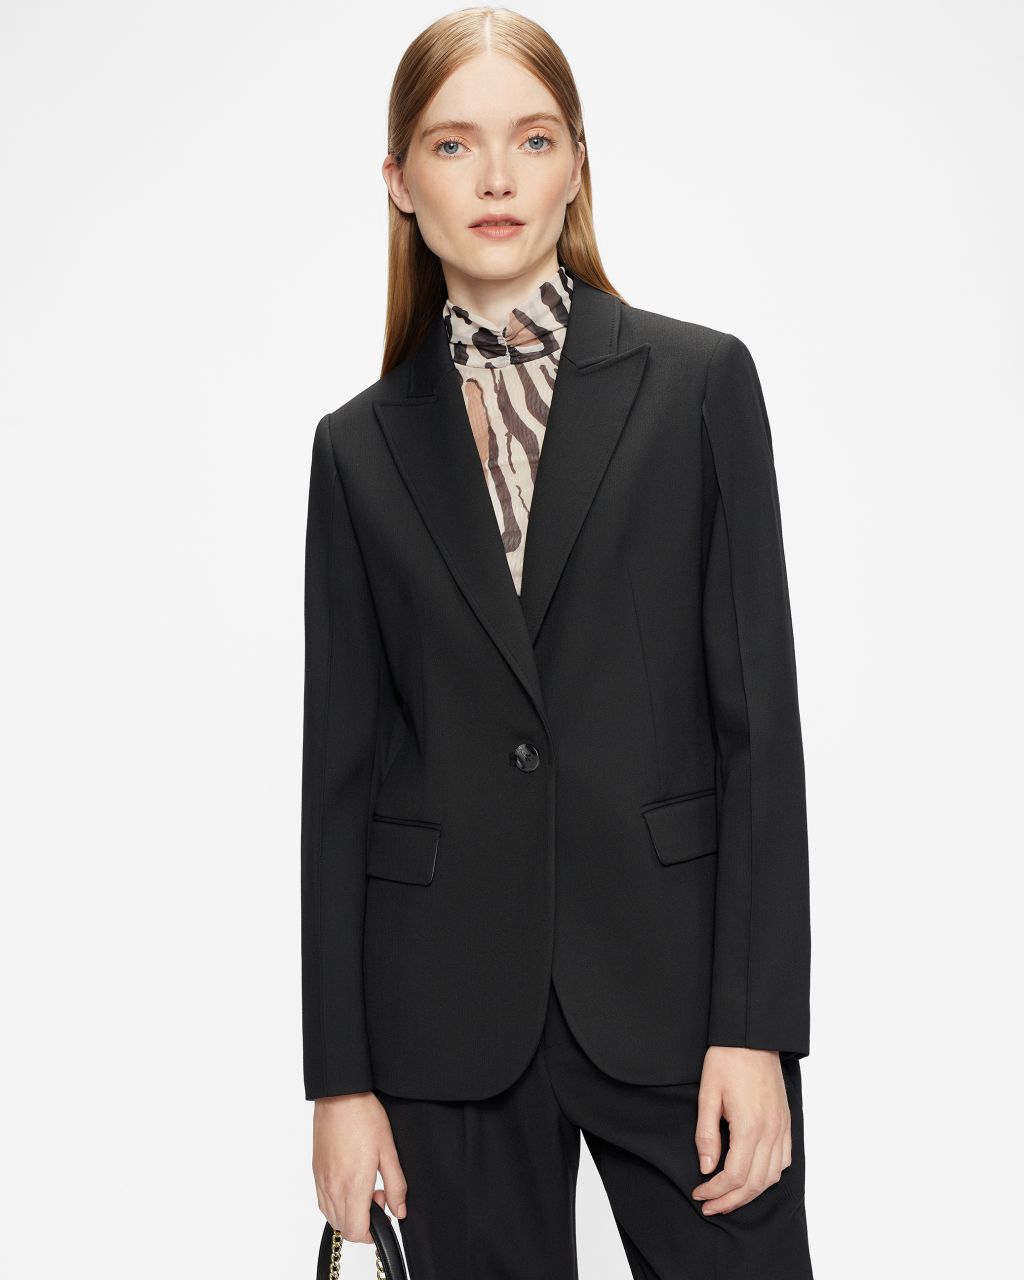 Ted Baker Women's Tailored Single Breasted Jacket in Black, Popiey